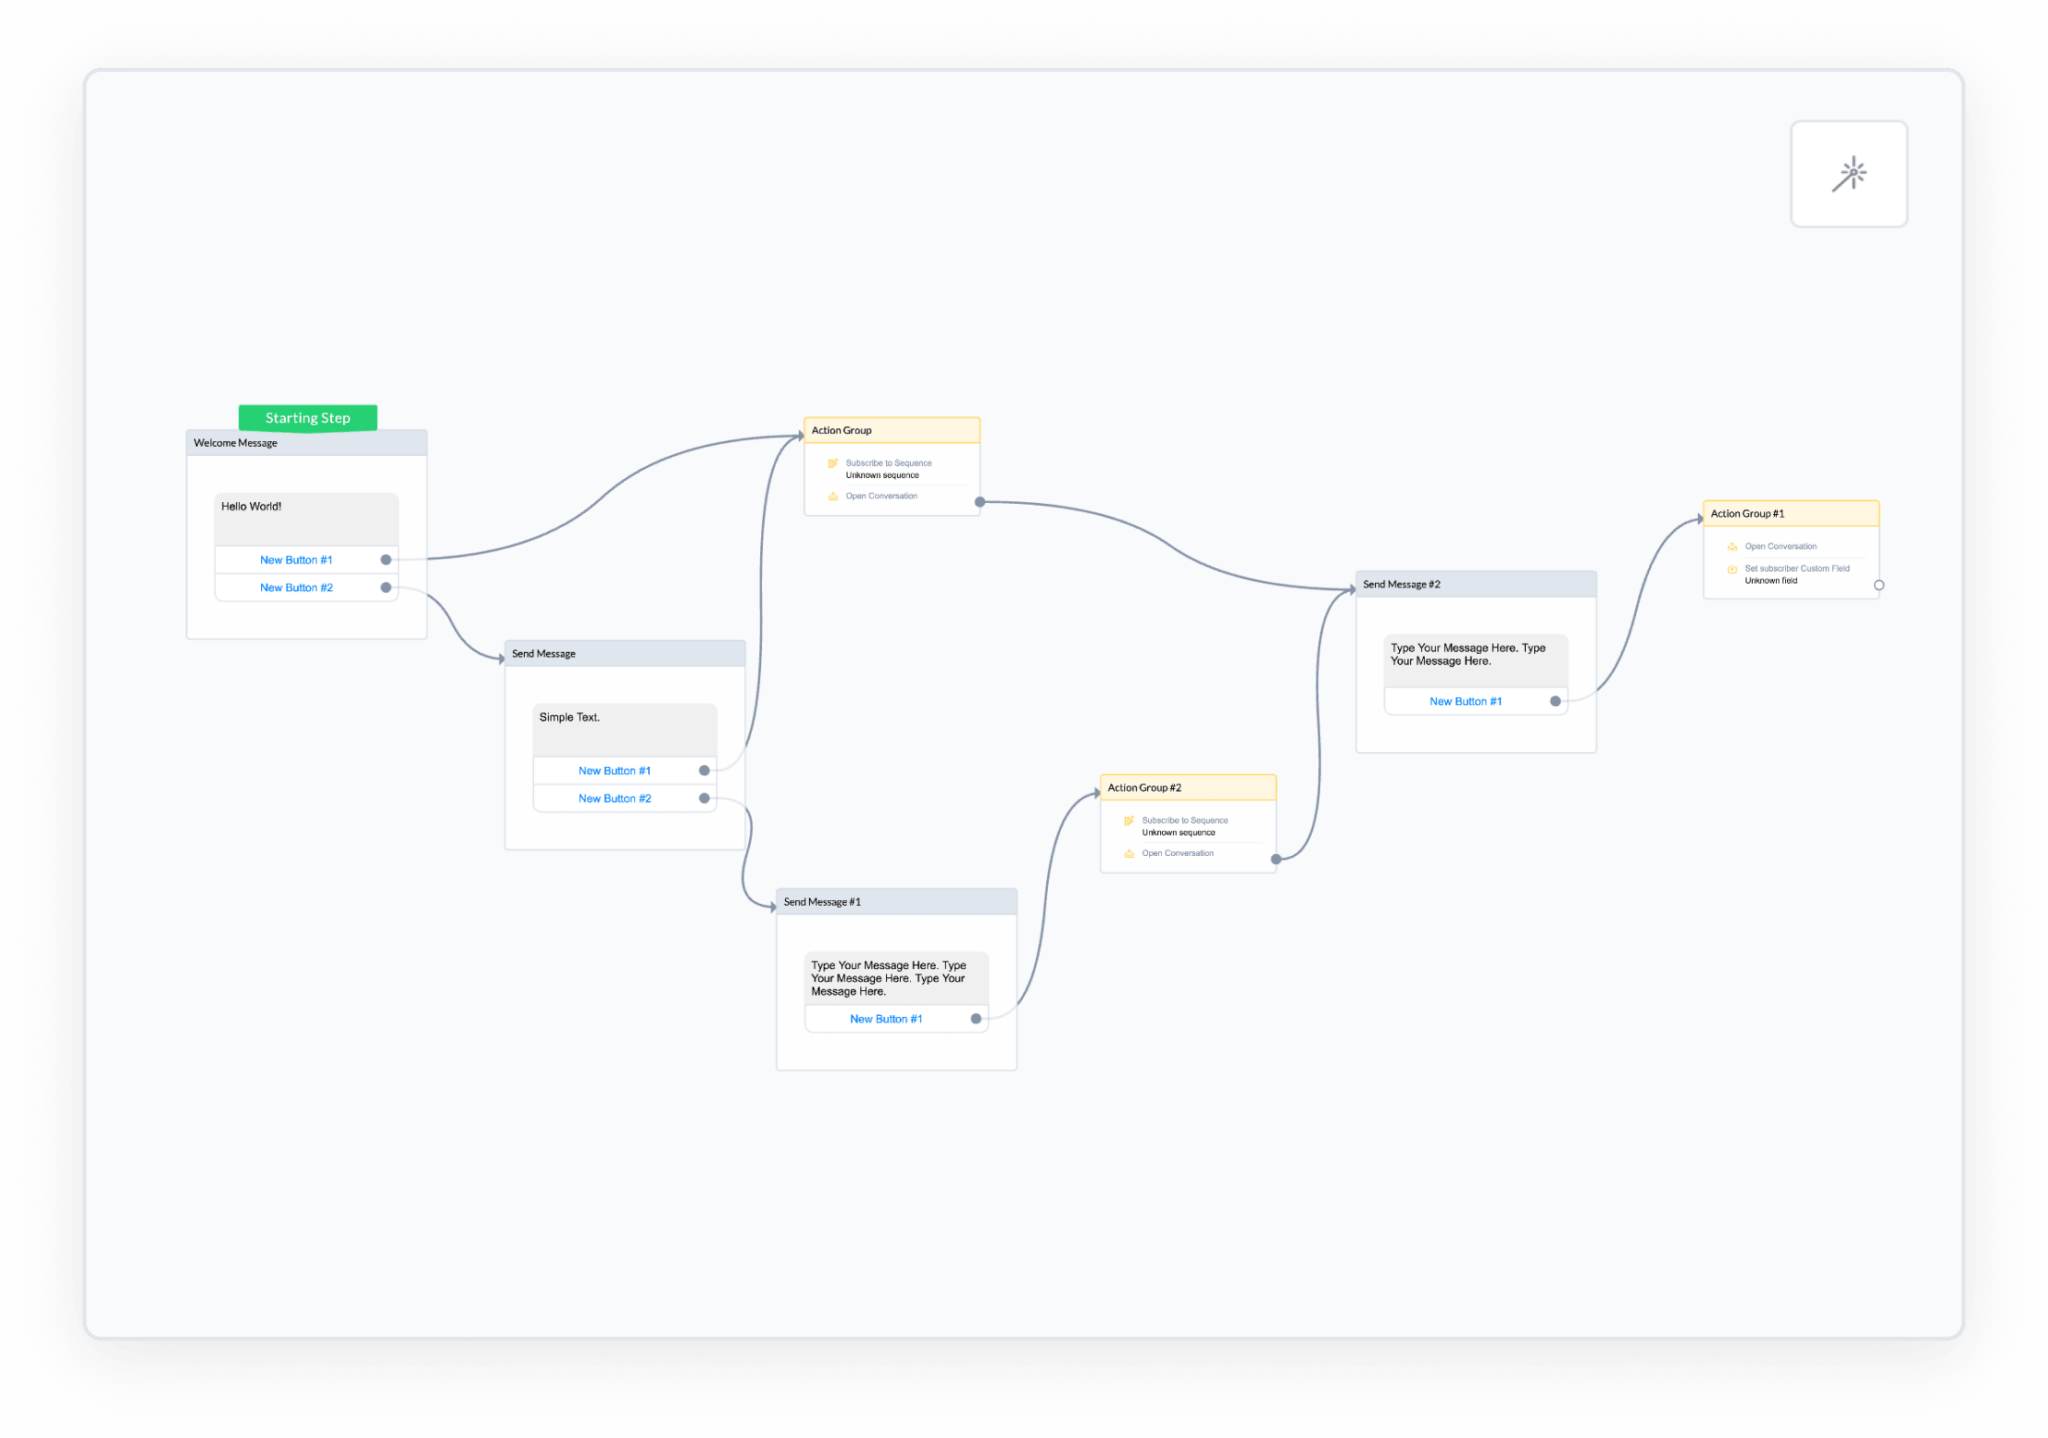 ManyChat Flow Builder